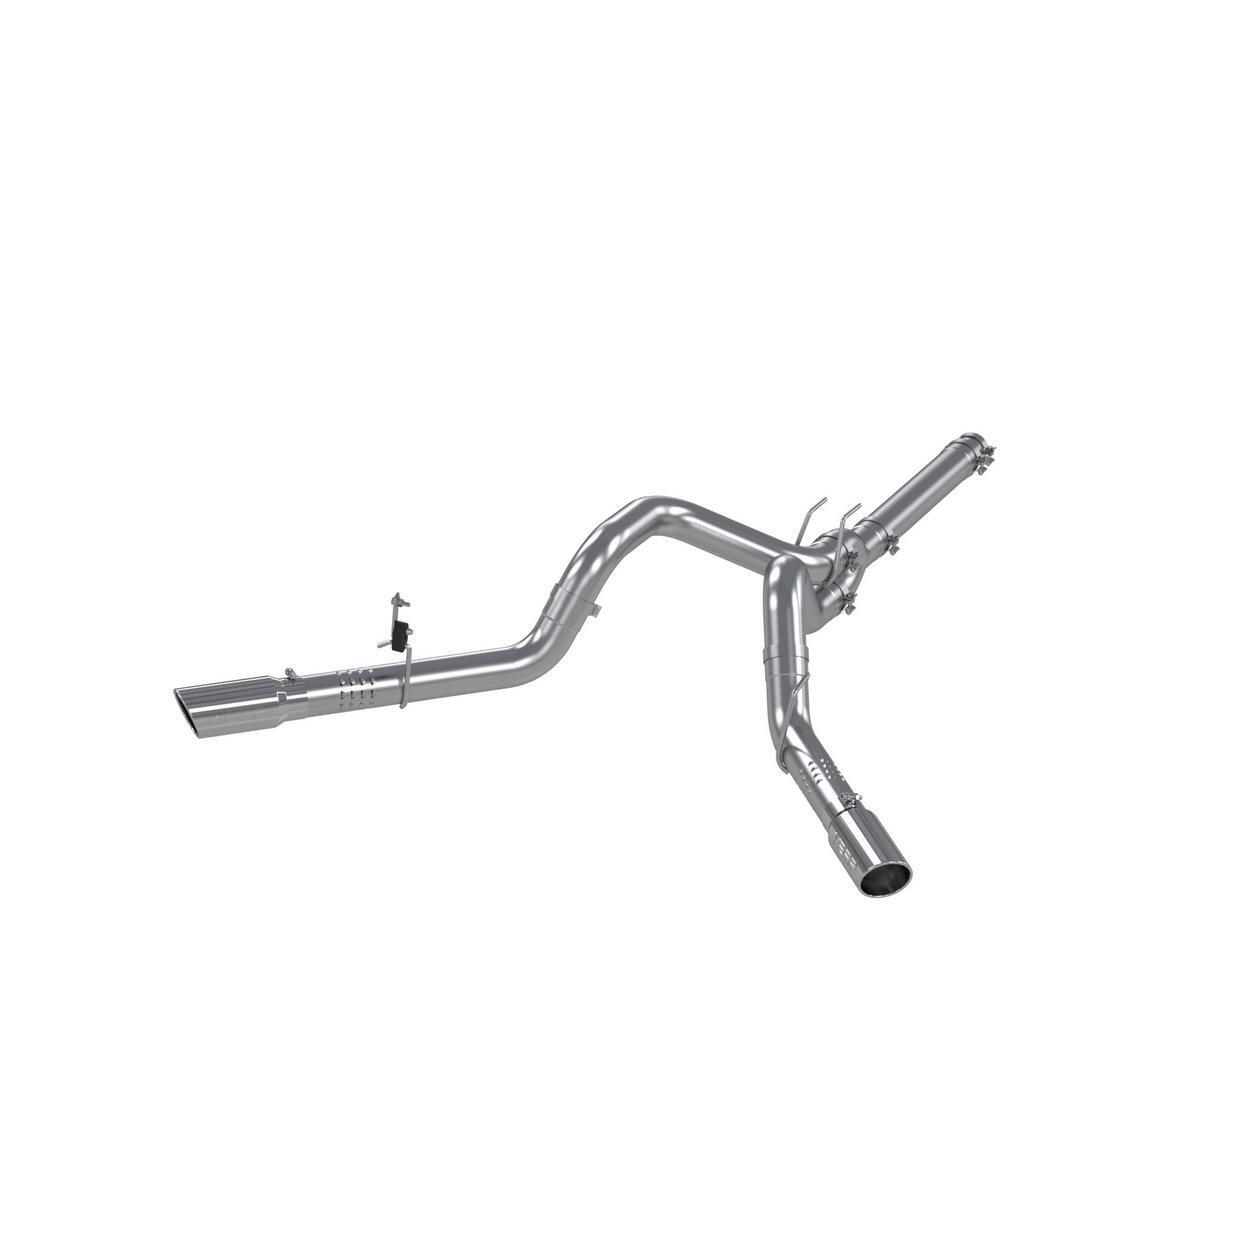 MBRP Exhaust System Kit for 2009 Ford F-450 Super Duty